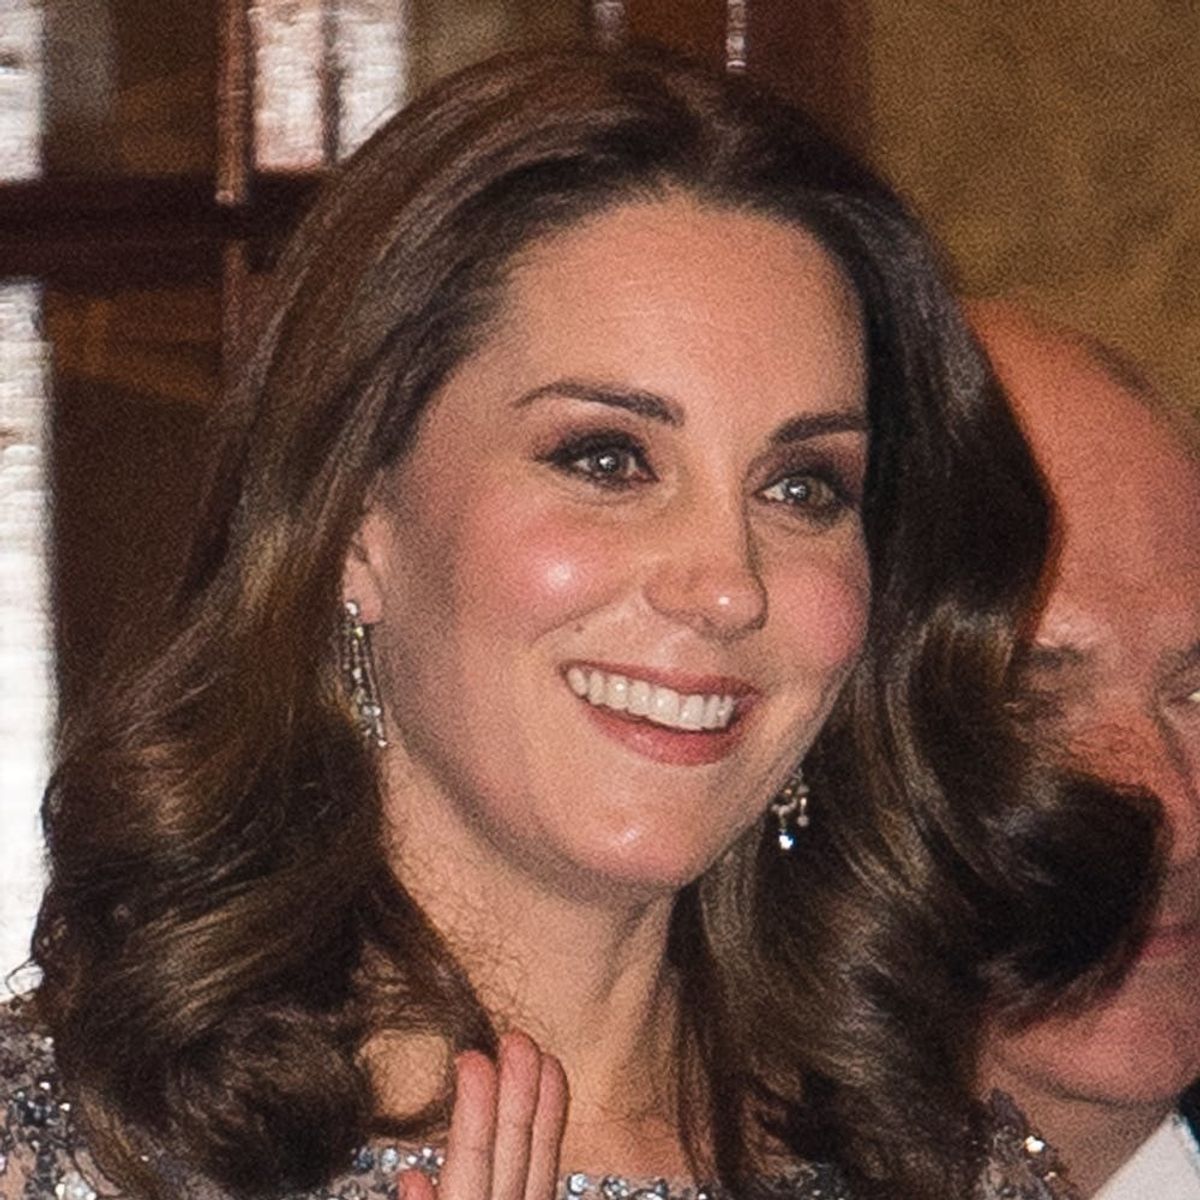 Kate Middleton Looked Just Like Disney’s Queen Elsa in This Gorgeous Ice Blue Gown